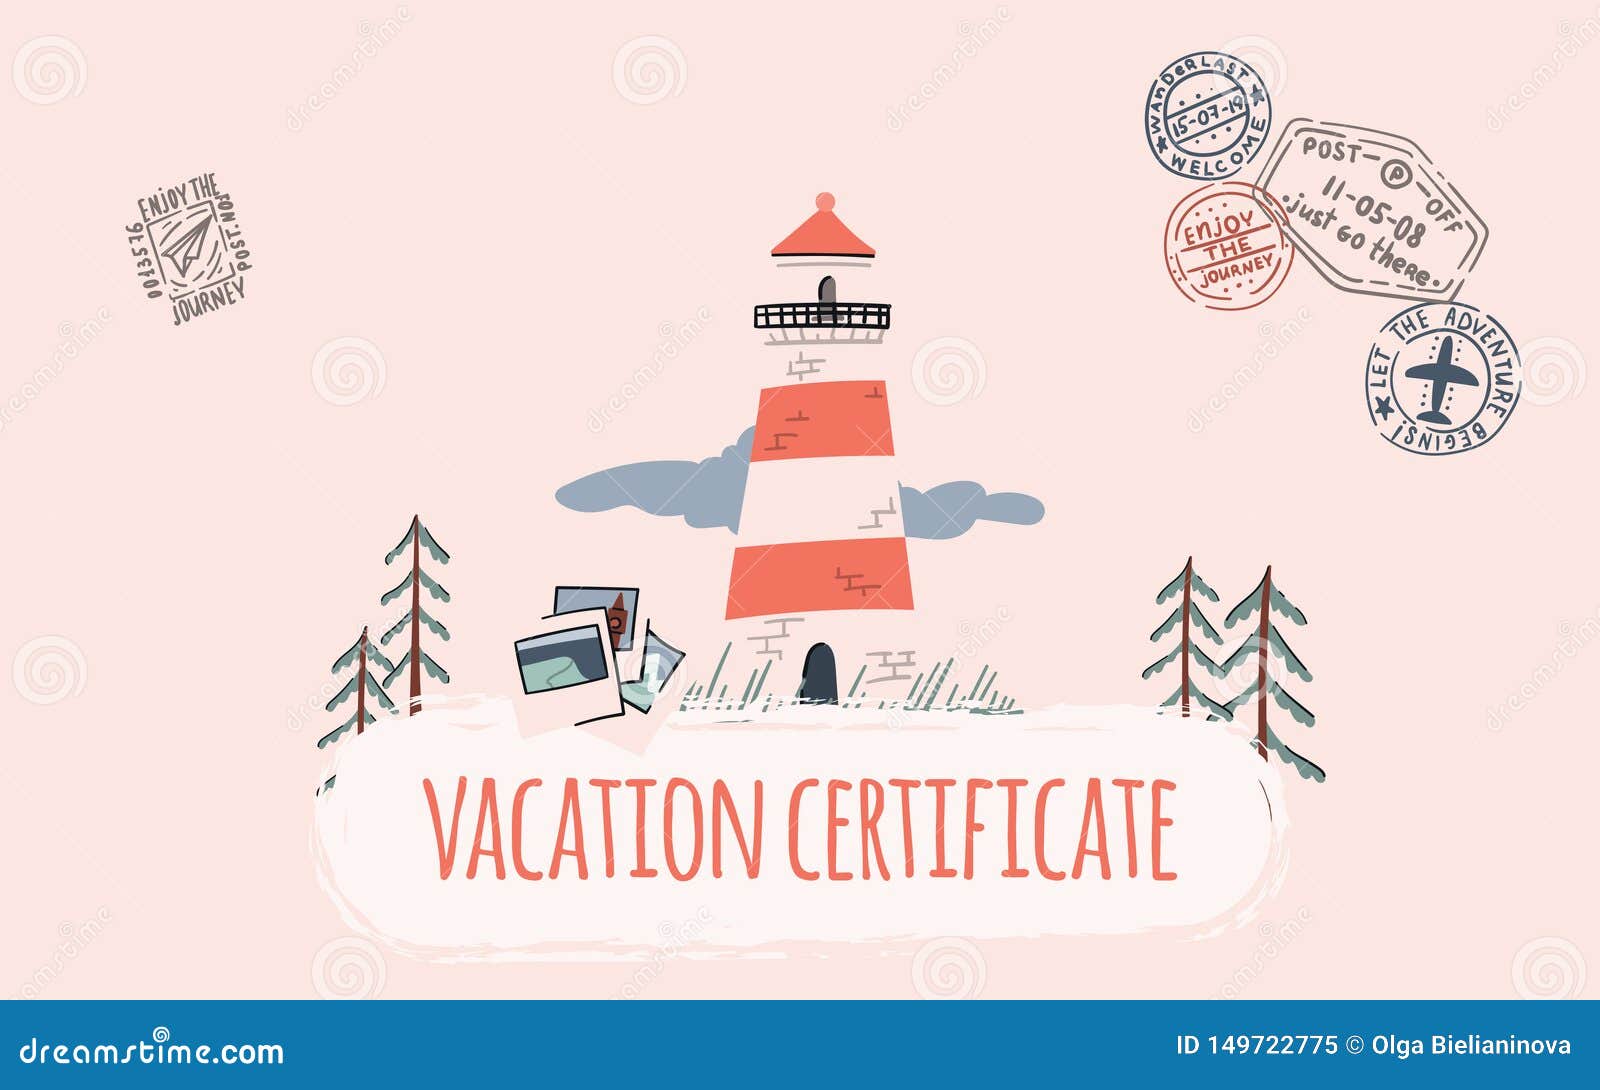 Travel Voucher Template Design Lighthouse Stamps Pines And Photos Banner Shop Coupon Certificate Or Flyer Layout Stock Vector Illustration Of Fashion Journey 149722775